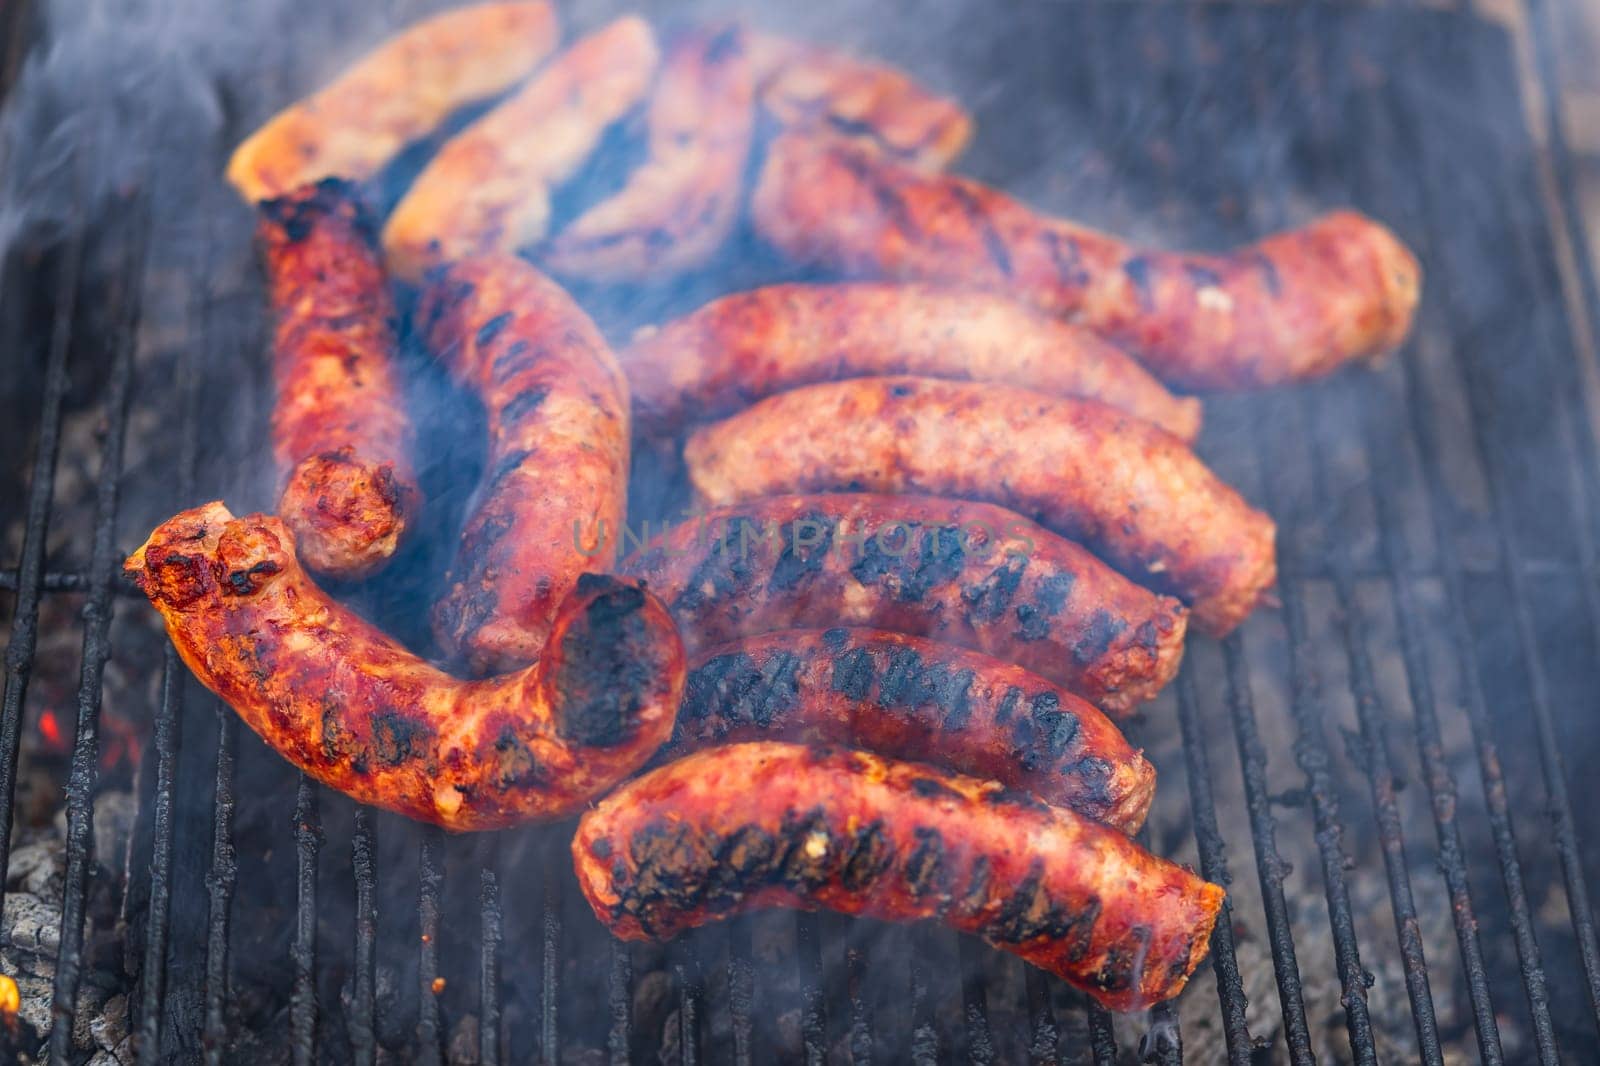 Grilling sausages on barbecue grill. Delicious sausages on charcoal grill by vladispas